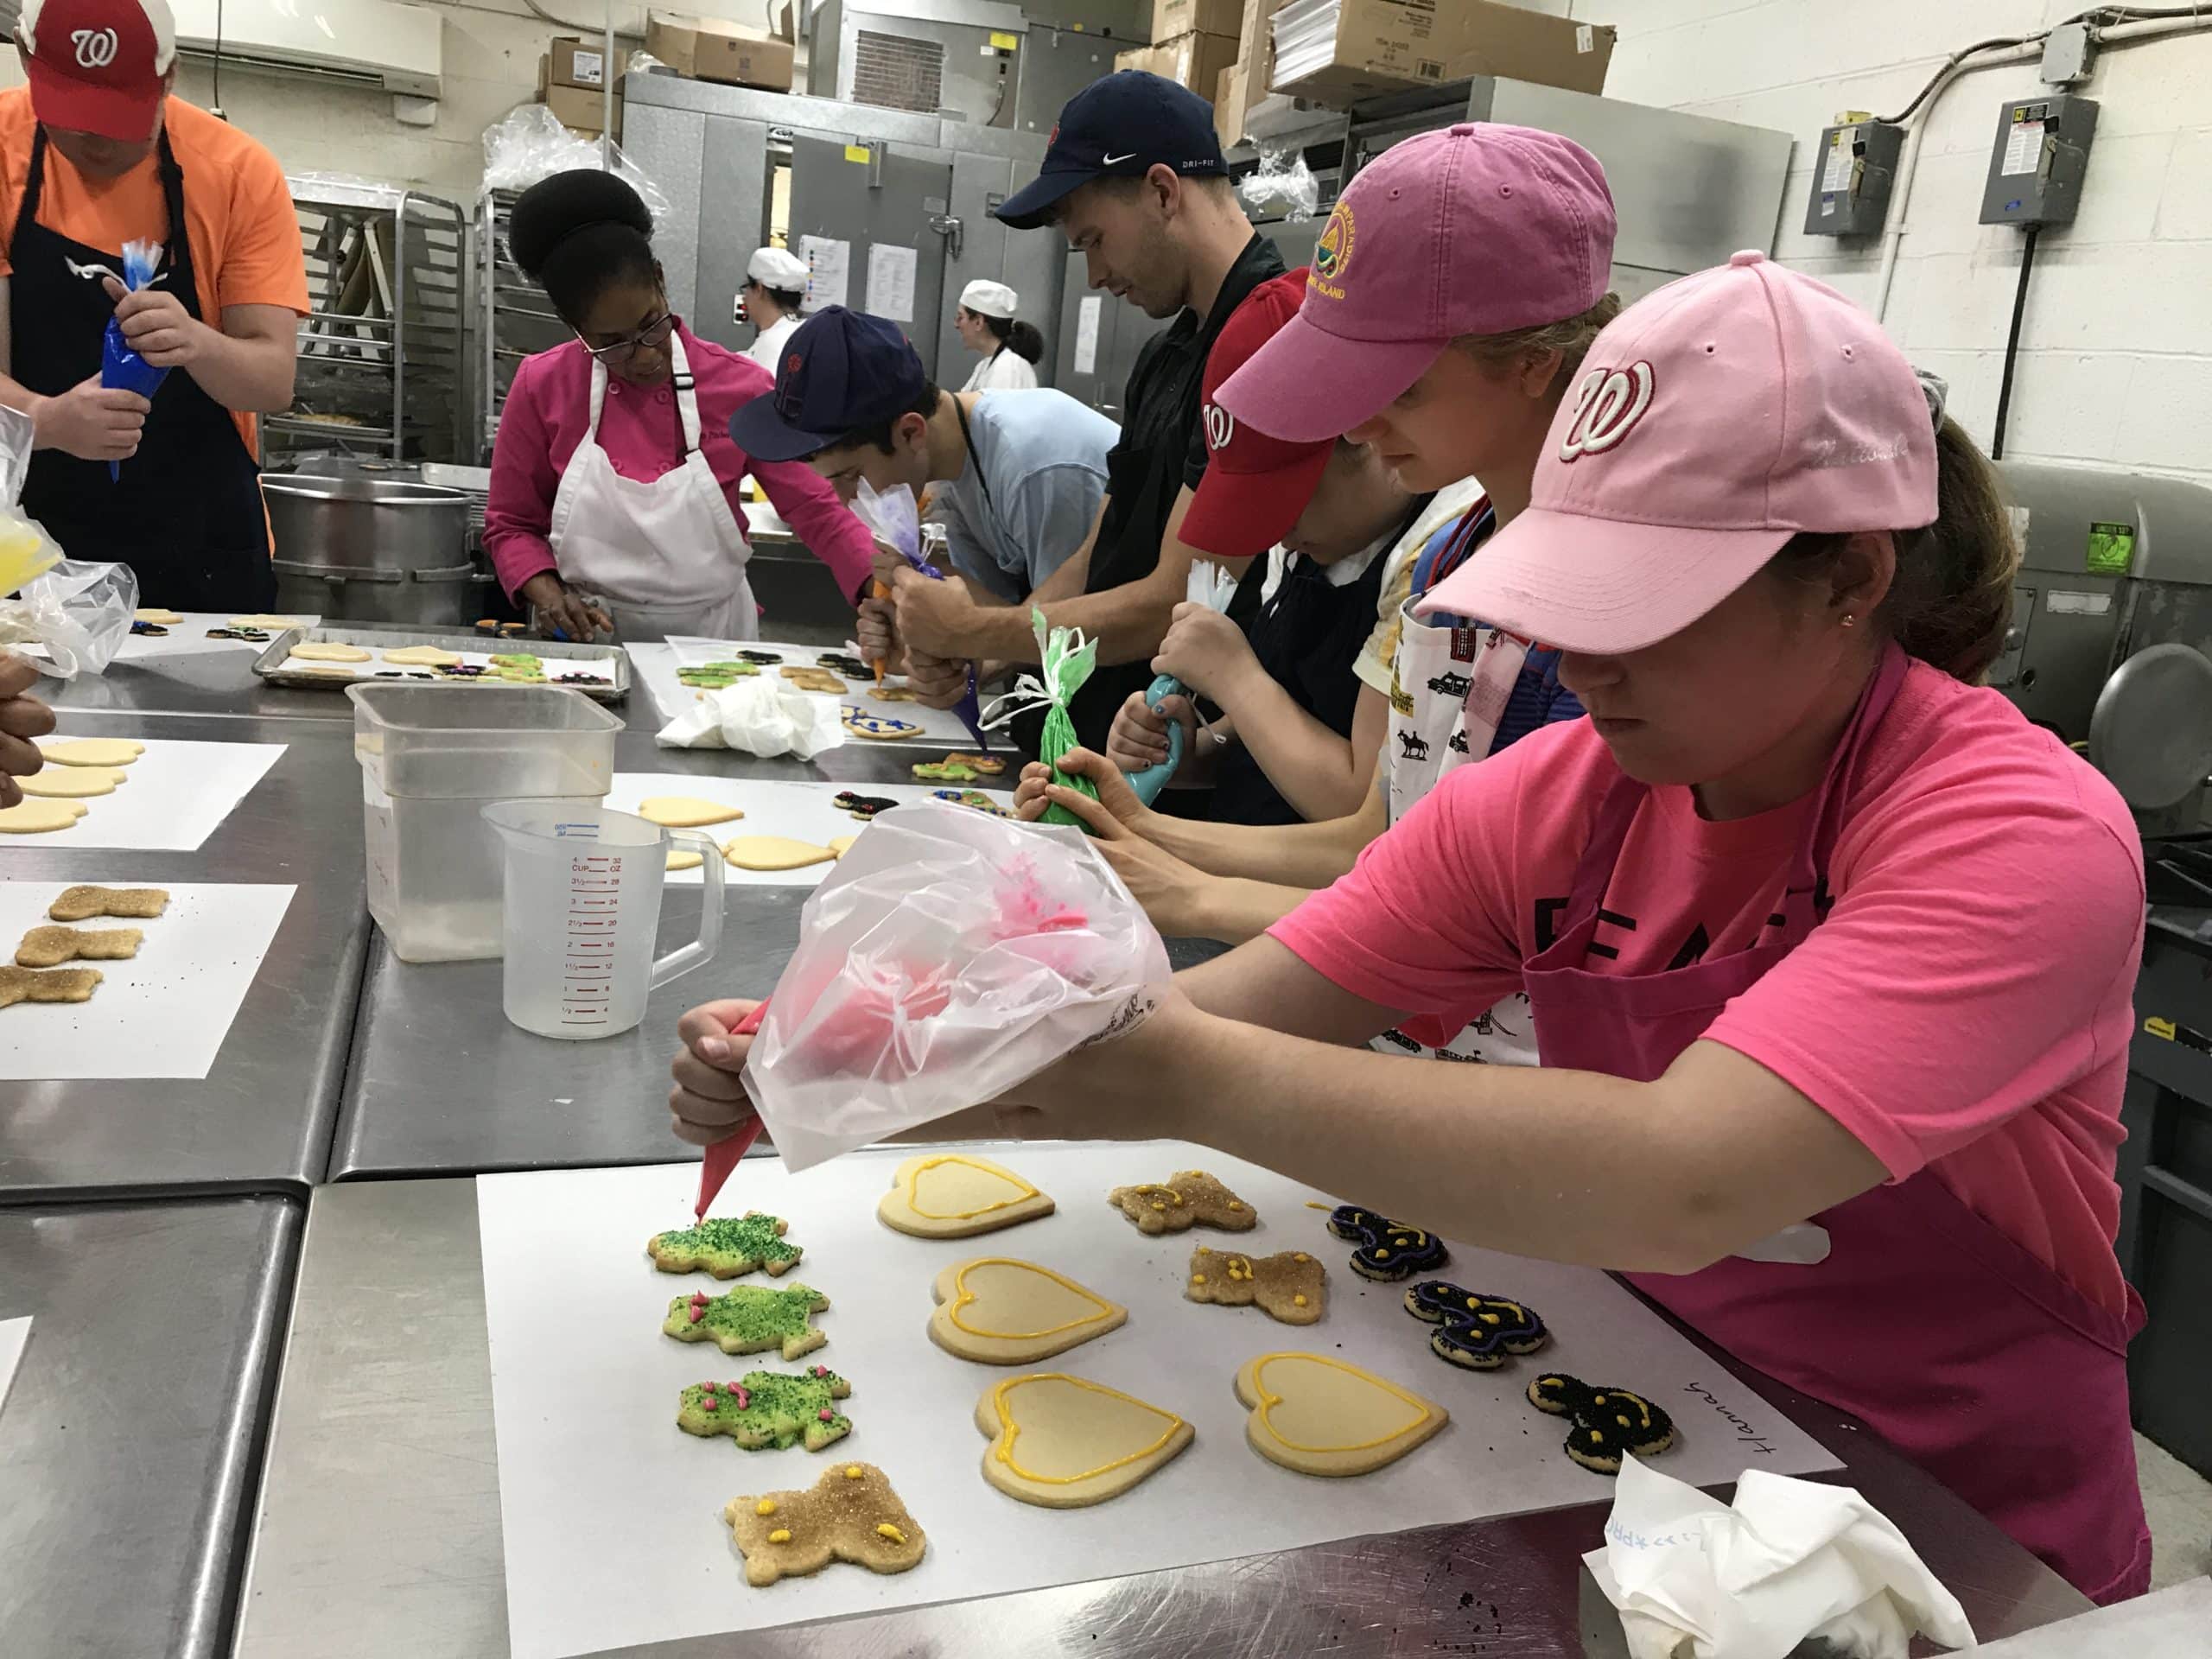 Teen program students decorating cookies and instructor